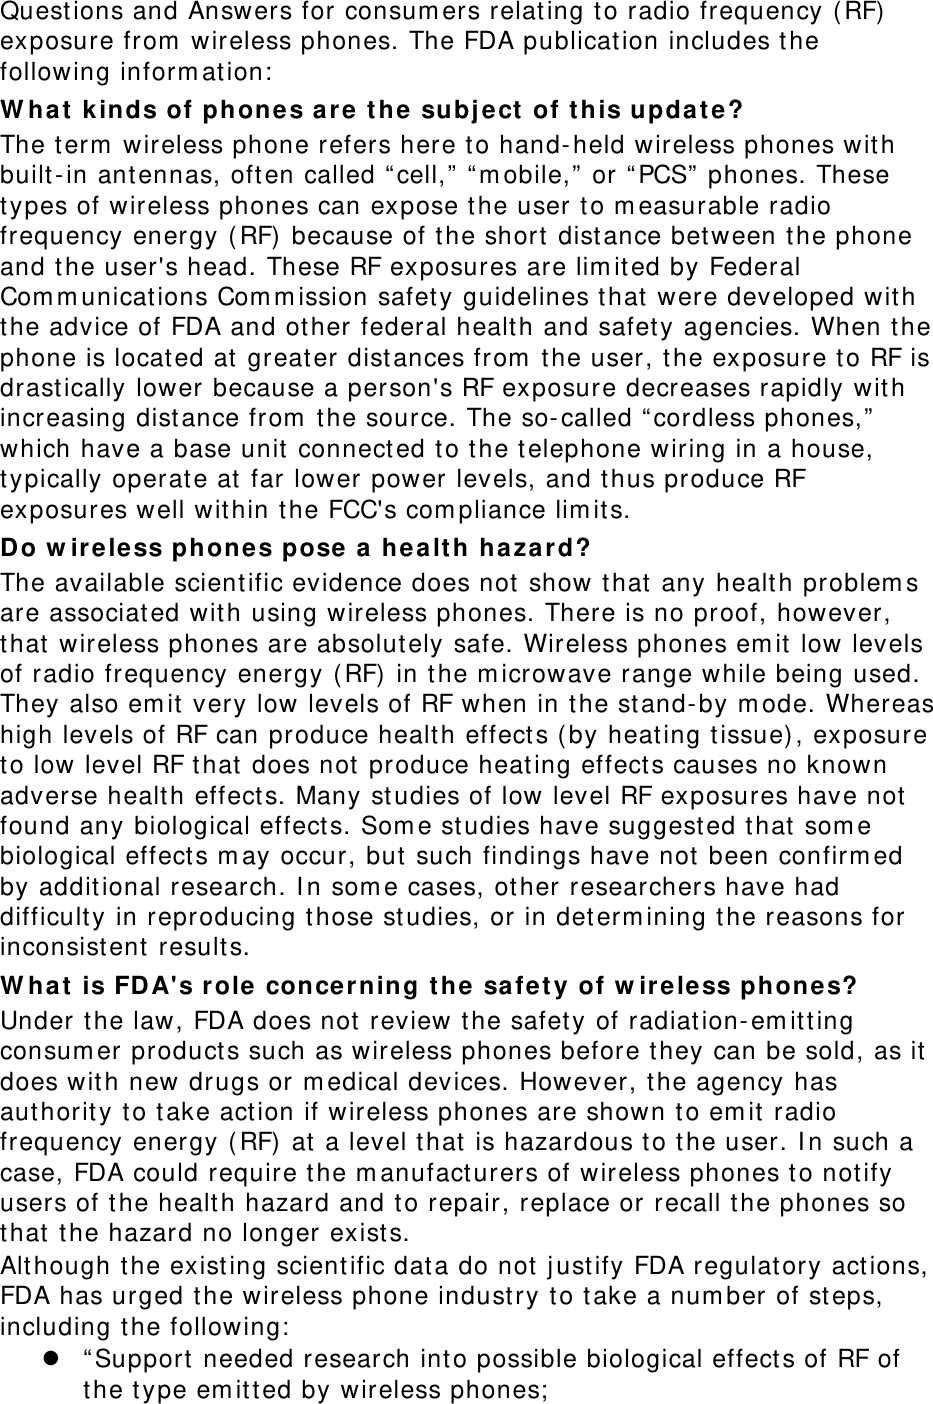 Questions and Answers for consumers relating to radio frequency (RF) exposure from wireless phones. The FDA publication includes the following information: What kinds of phones are the subject of this update? The term wireless phone refers here to hand-held wireless phones with built-in antennas, often called “cell,” “mobile,” or “PCS” phones. These types of wireless phones can expose the user to measurable radio frequency energy (RF) because of the short distance between the phone and the user&apos;s head. These RF exposures are limited by Federal Communications Commission safety guidelines that were developed with the advice of FDA and other federal health and safety agencies. When the phone is located at greater distances from the user, the exposure to RF is drastically lower because a person&apos;s RF exposure decreases rapidly with increasing distance from the source. The so-called “cordless phones,” which have a base unit connected to the telephone wiring in a house, typically operate at far lower power levels, and thus produce RF exposures well within the FCC&apos;s compliance limits. Do wireless phones pose a health hazard? The available scientific evidence does not show that any health problems are associated with using wireless phones. There is no proof, however, that wireless phones are absolutely safe. Wireless phones emit low levels of radio frequency energy (RF) in the microwave range while being used. They also emit very low levels of RF when in the stand-by mode. Whereas high levels of RF can produce health effects (by heating tissue), exposure to low level RF that does not produce heating effects causes no known adverse health effects. Many studies of low level RF exposures have not found any biological effects. Some studies have suggested that some biological effects may occur, but such findings have not been confirmed by additional research. In some cases, other researchers have had difficulty in reproducing those studies, or in determining the reasons for inconsistent results. What is FDA&apos;s role concerning the safety of wireless phones? Under the law, FDA does not review the safety of radiation-emitting consumer products such as wireless phones before they can be sold, as it does with new drugs or medical devices. However, the agency has authority to take action if wireless phones are shown to emit radio frequency energy (RF) at a level that is hazardous to the user. In such a case, FDA could require the manufacturers of wireless phones to notify users of the health hazard and to repair, replace or recall the phones so that the hazard no longer exists. Although the existing scientific data do not justify FDA regulatory actions, FDA has urged the wireless phone industry to take a number of steps, including the following: “Support needed research into possible biological effects of RF ofthe type emitted by wireless phones;